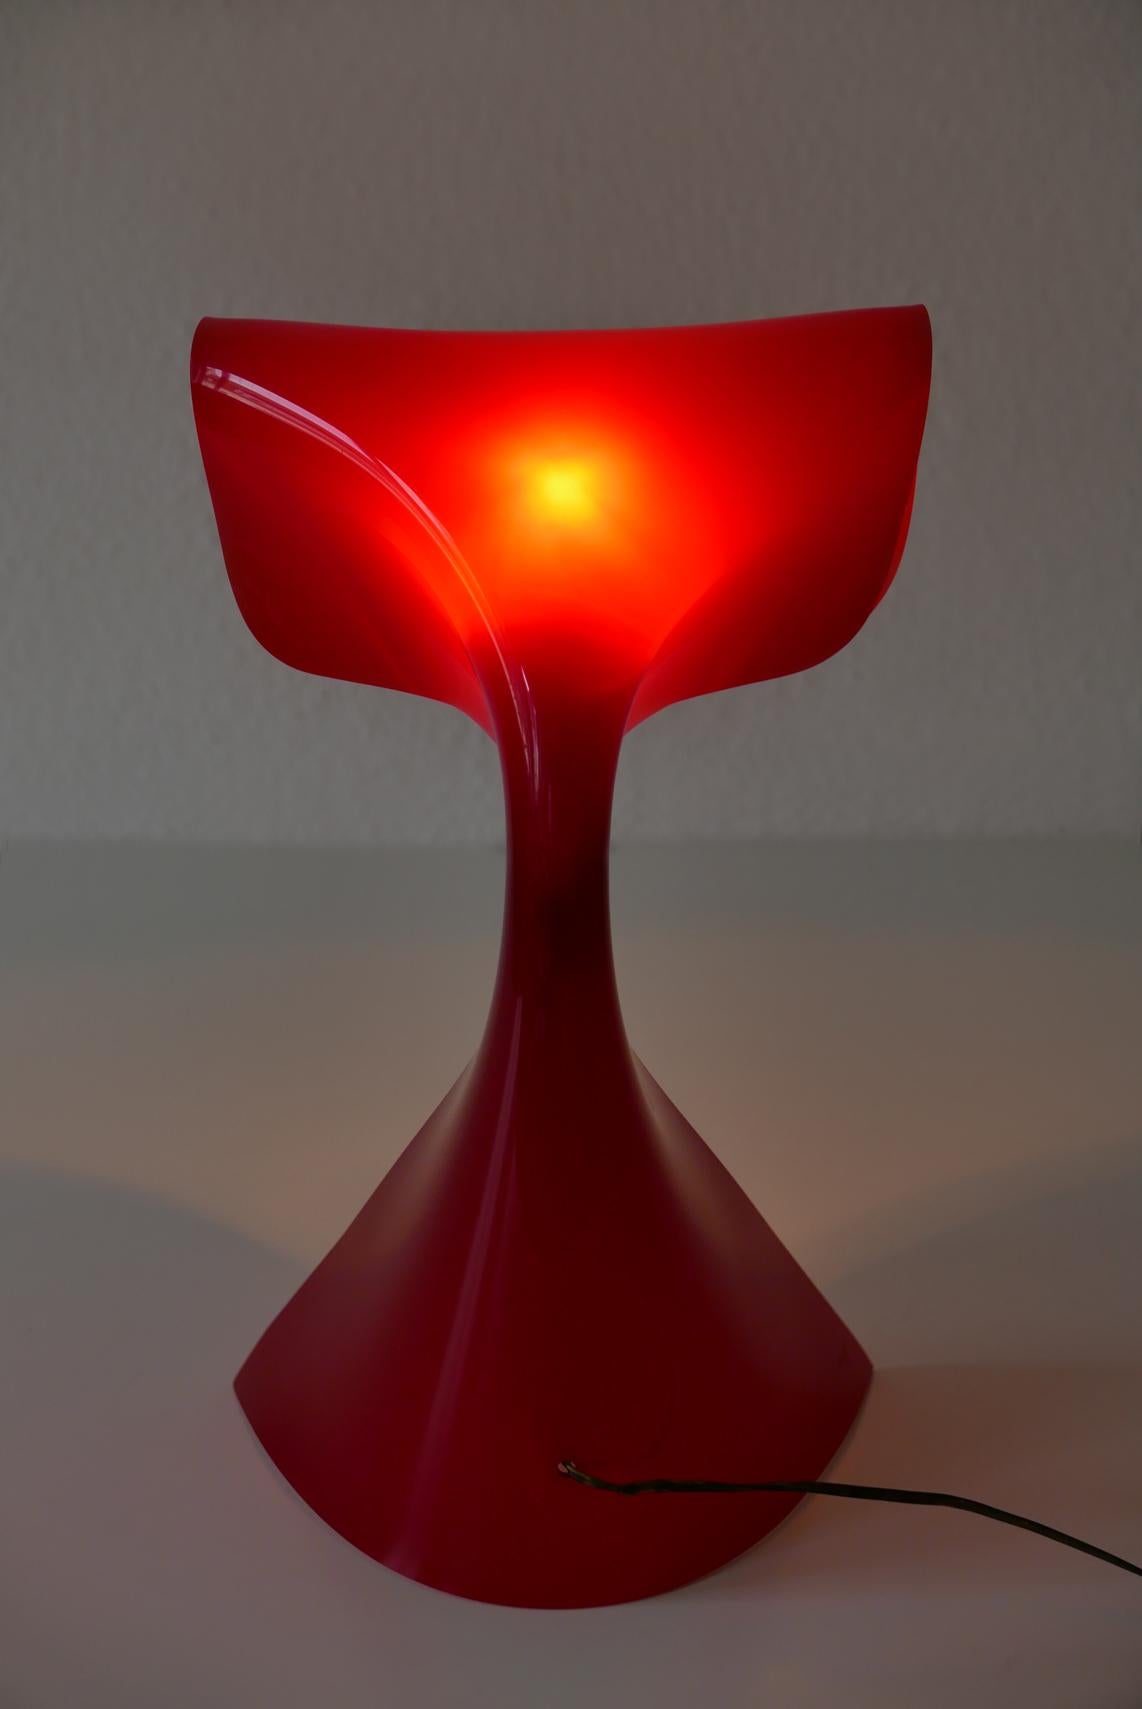 Exceptional Table Lamp by Hanns Hoffmann-Lederer for Heinz Hecht, 1950s, Germany For Sale 11